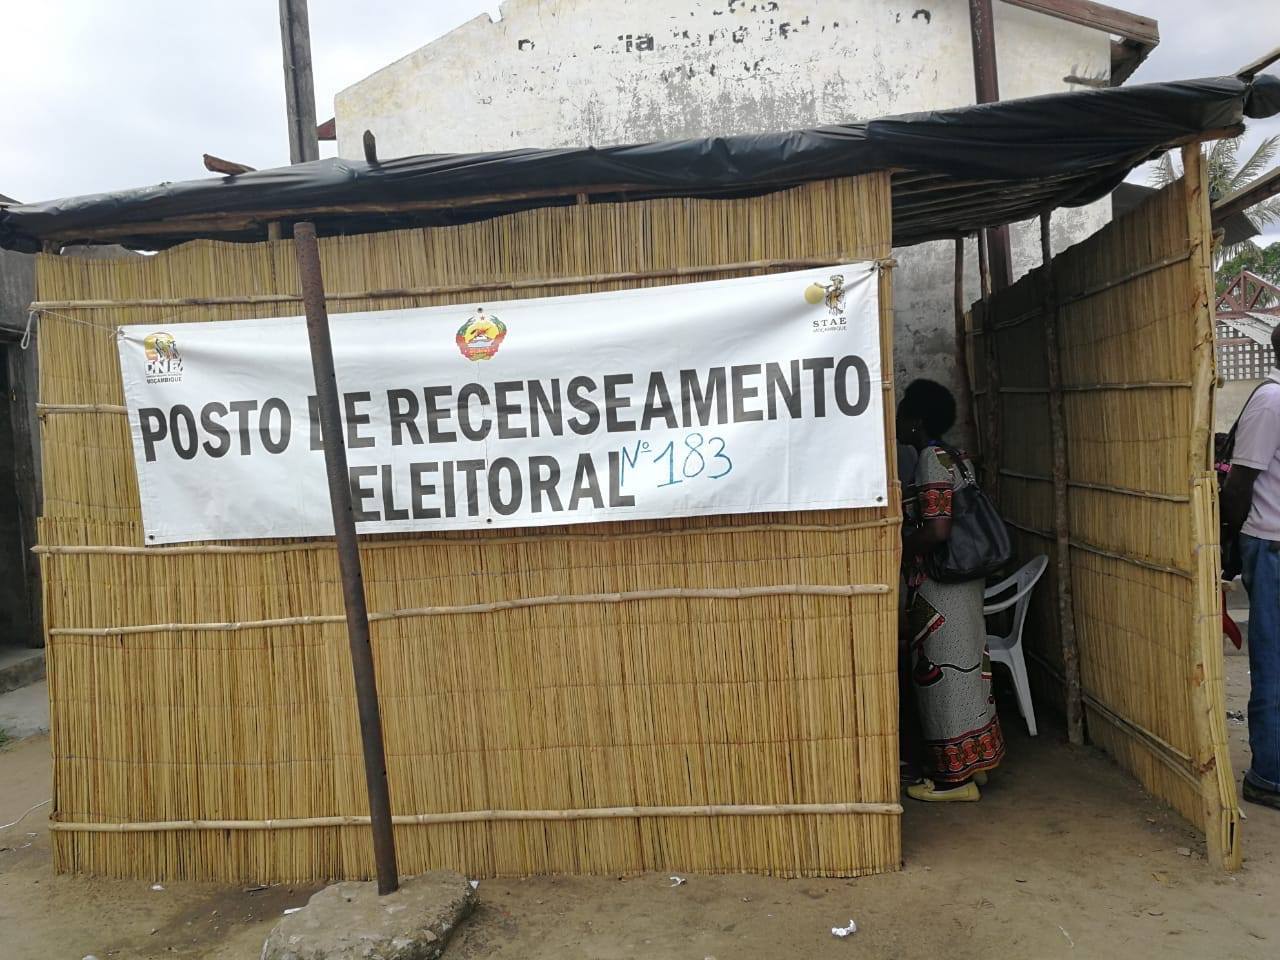 The EU-funded ‘Support to Consolidation of Democracy in Mozambique Programme’ worked with citizen voter registration officials, who created voter cards in rural conditions. Photo credit: International IDEA